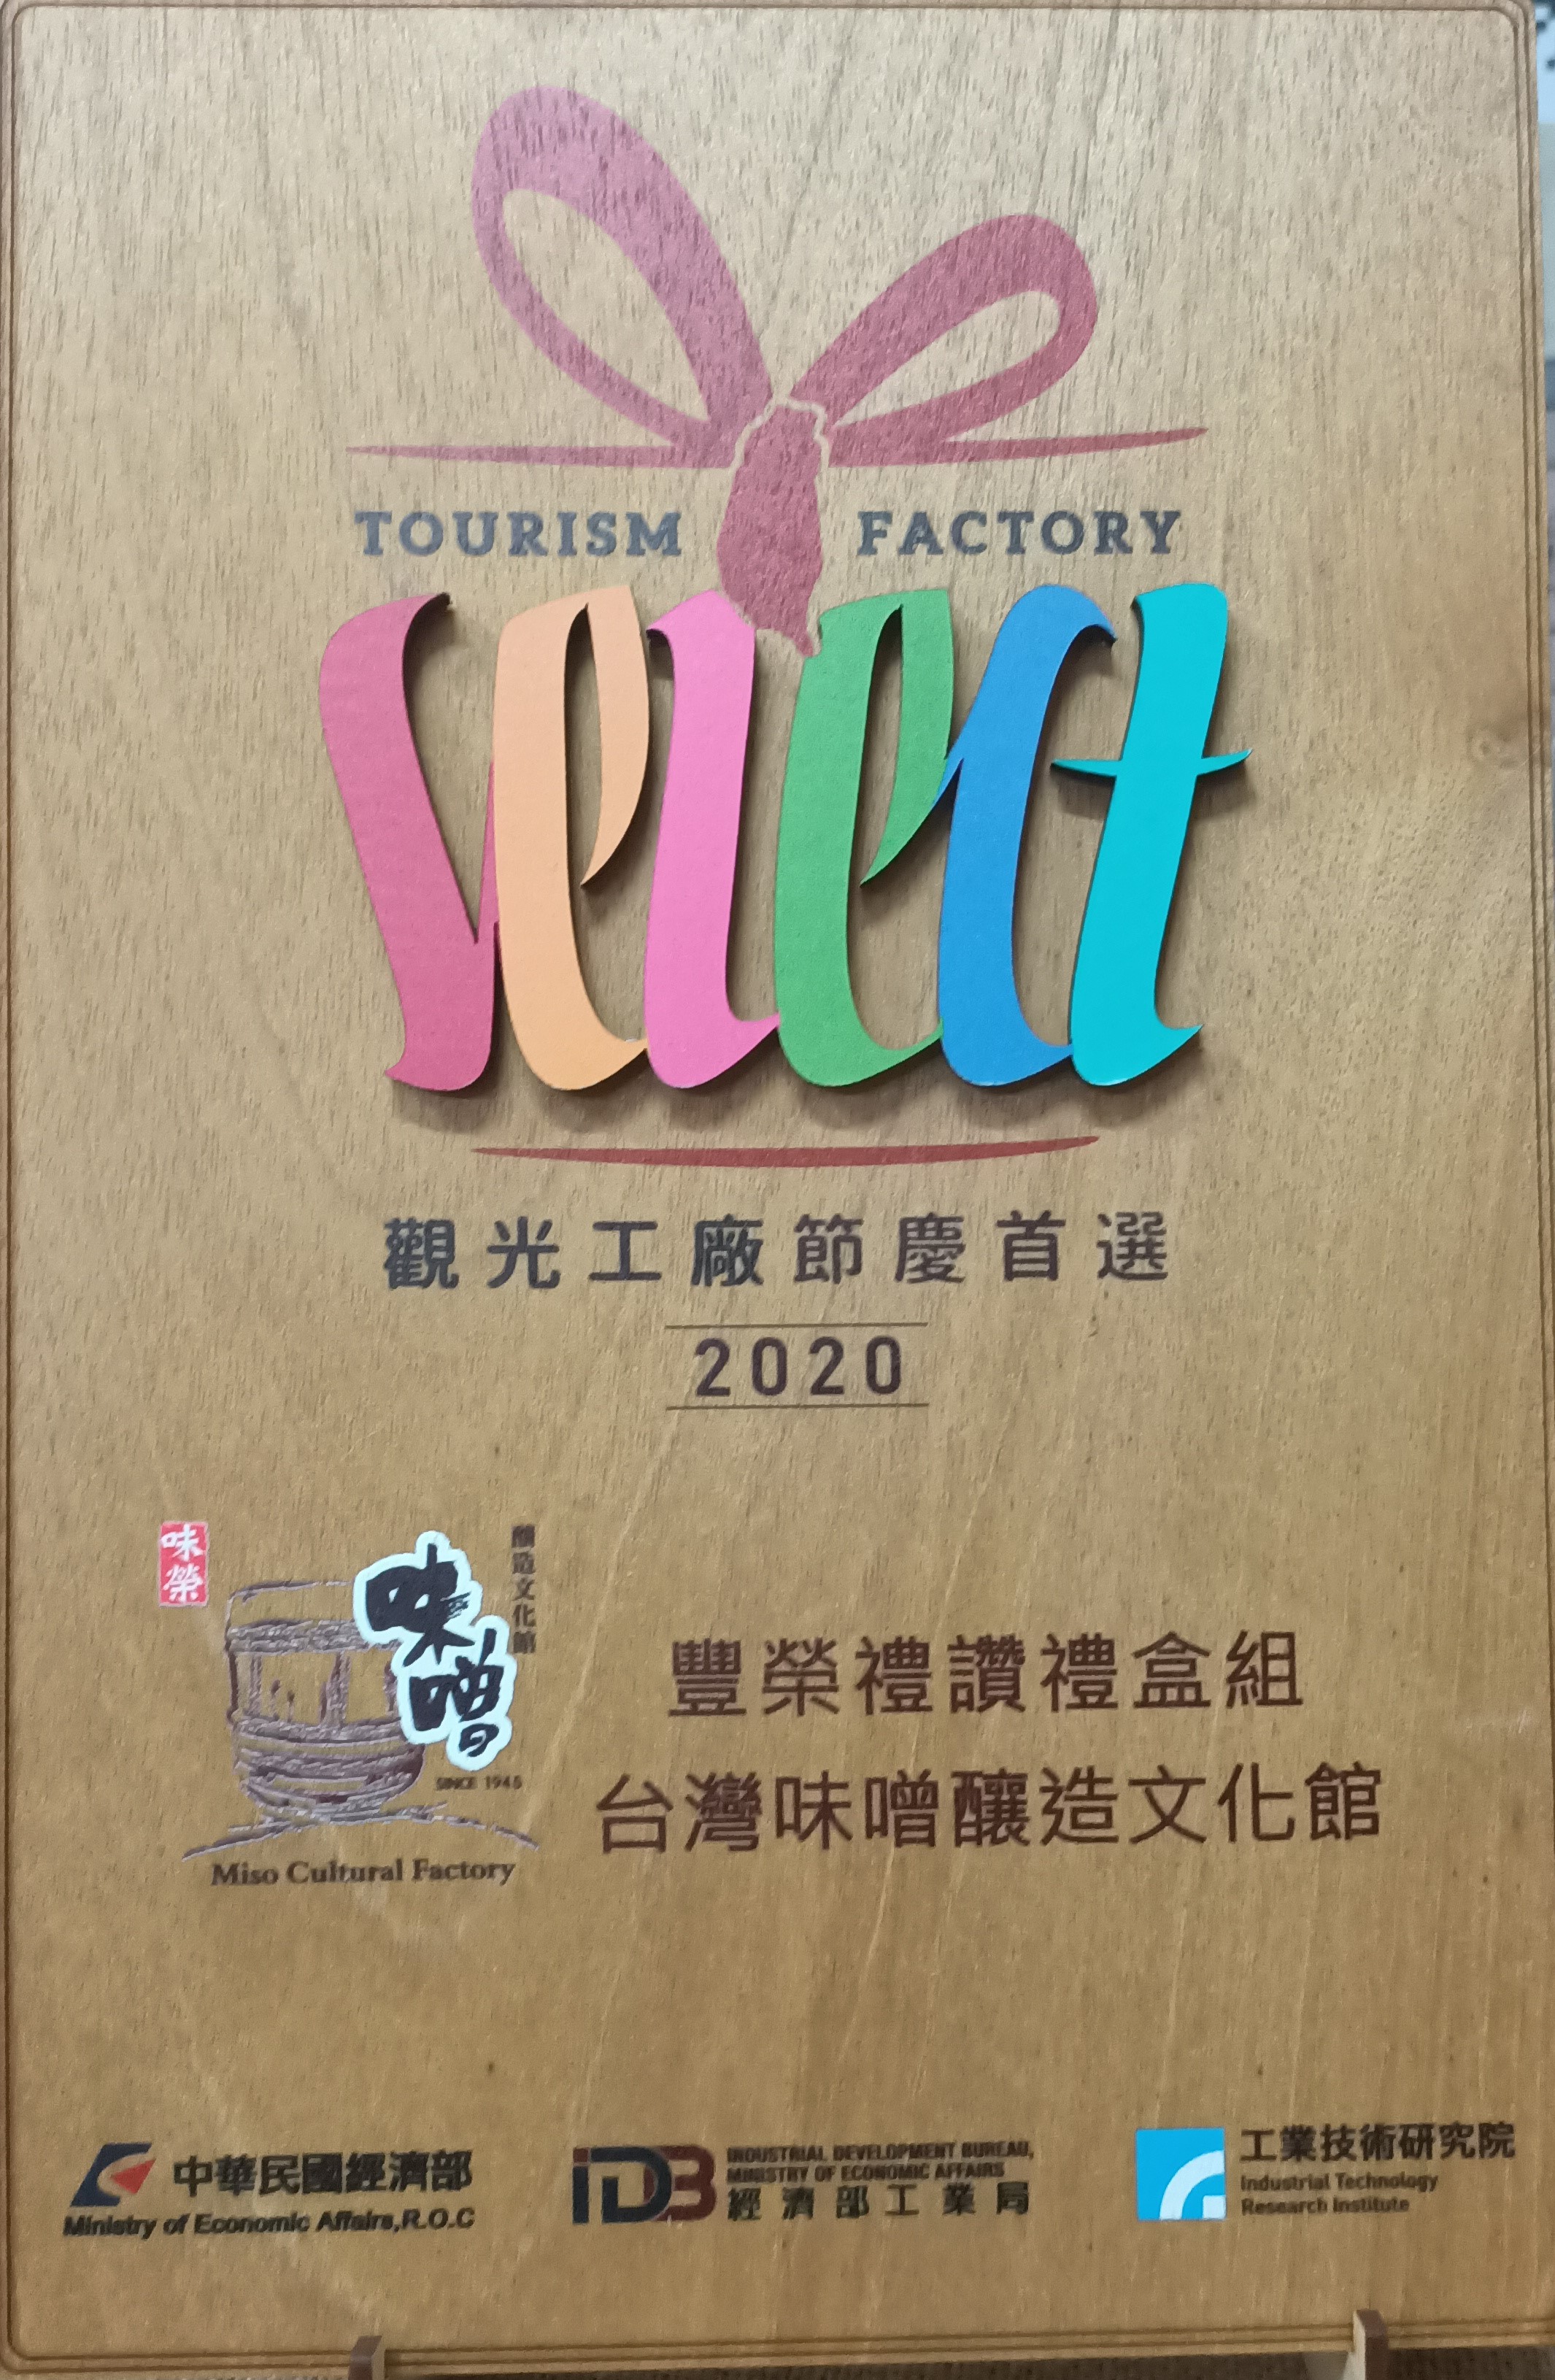 [Fengrong Praise Gift Box] won the "Festival First Choice" award from the Tourism Factory of the Ministry of Economic Affairs